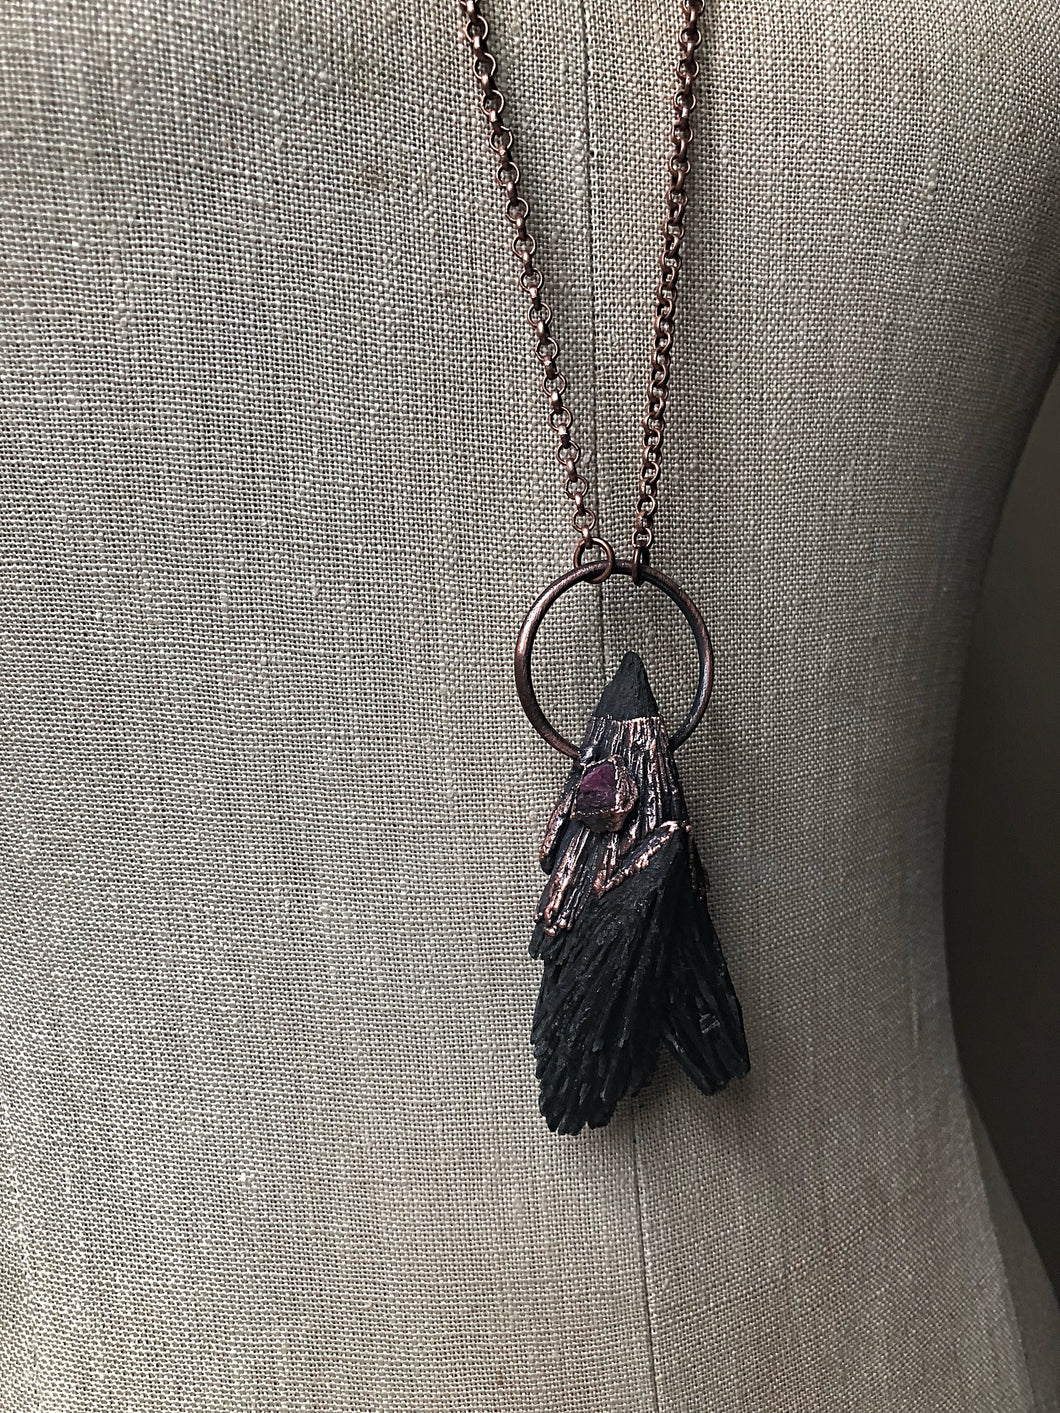 Black Kyanite and Raw Ruby Necklace (Ready to Ship) - Darkness Calling Collection